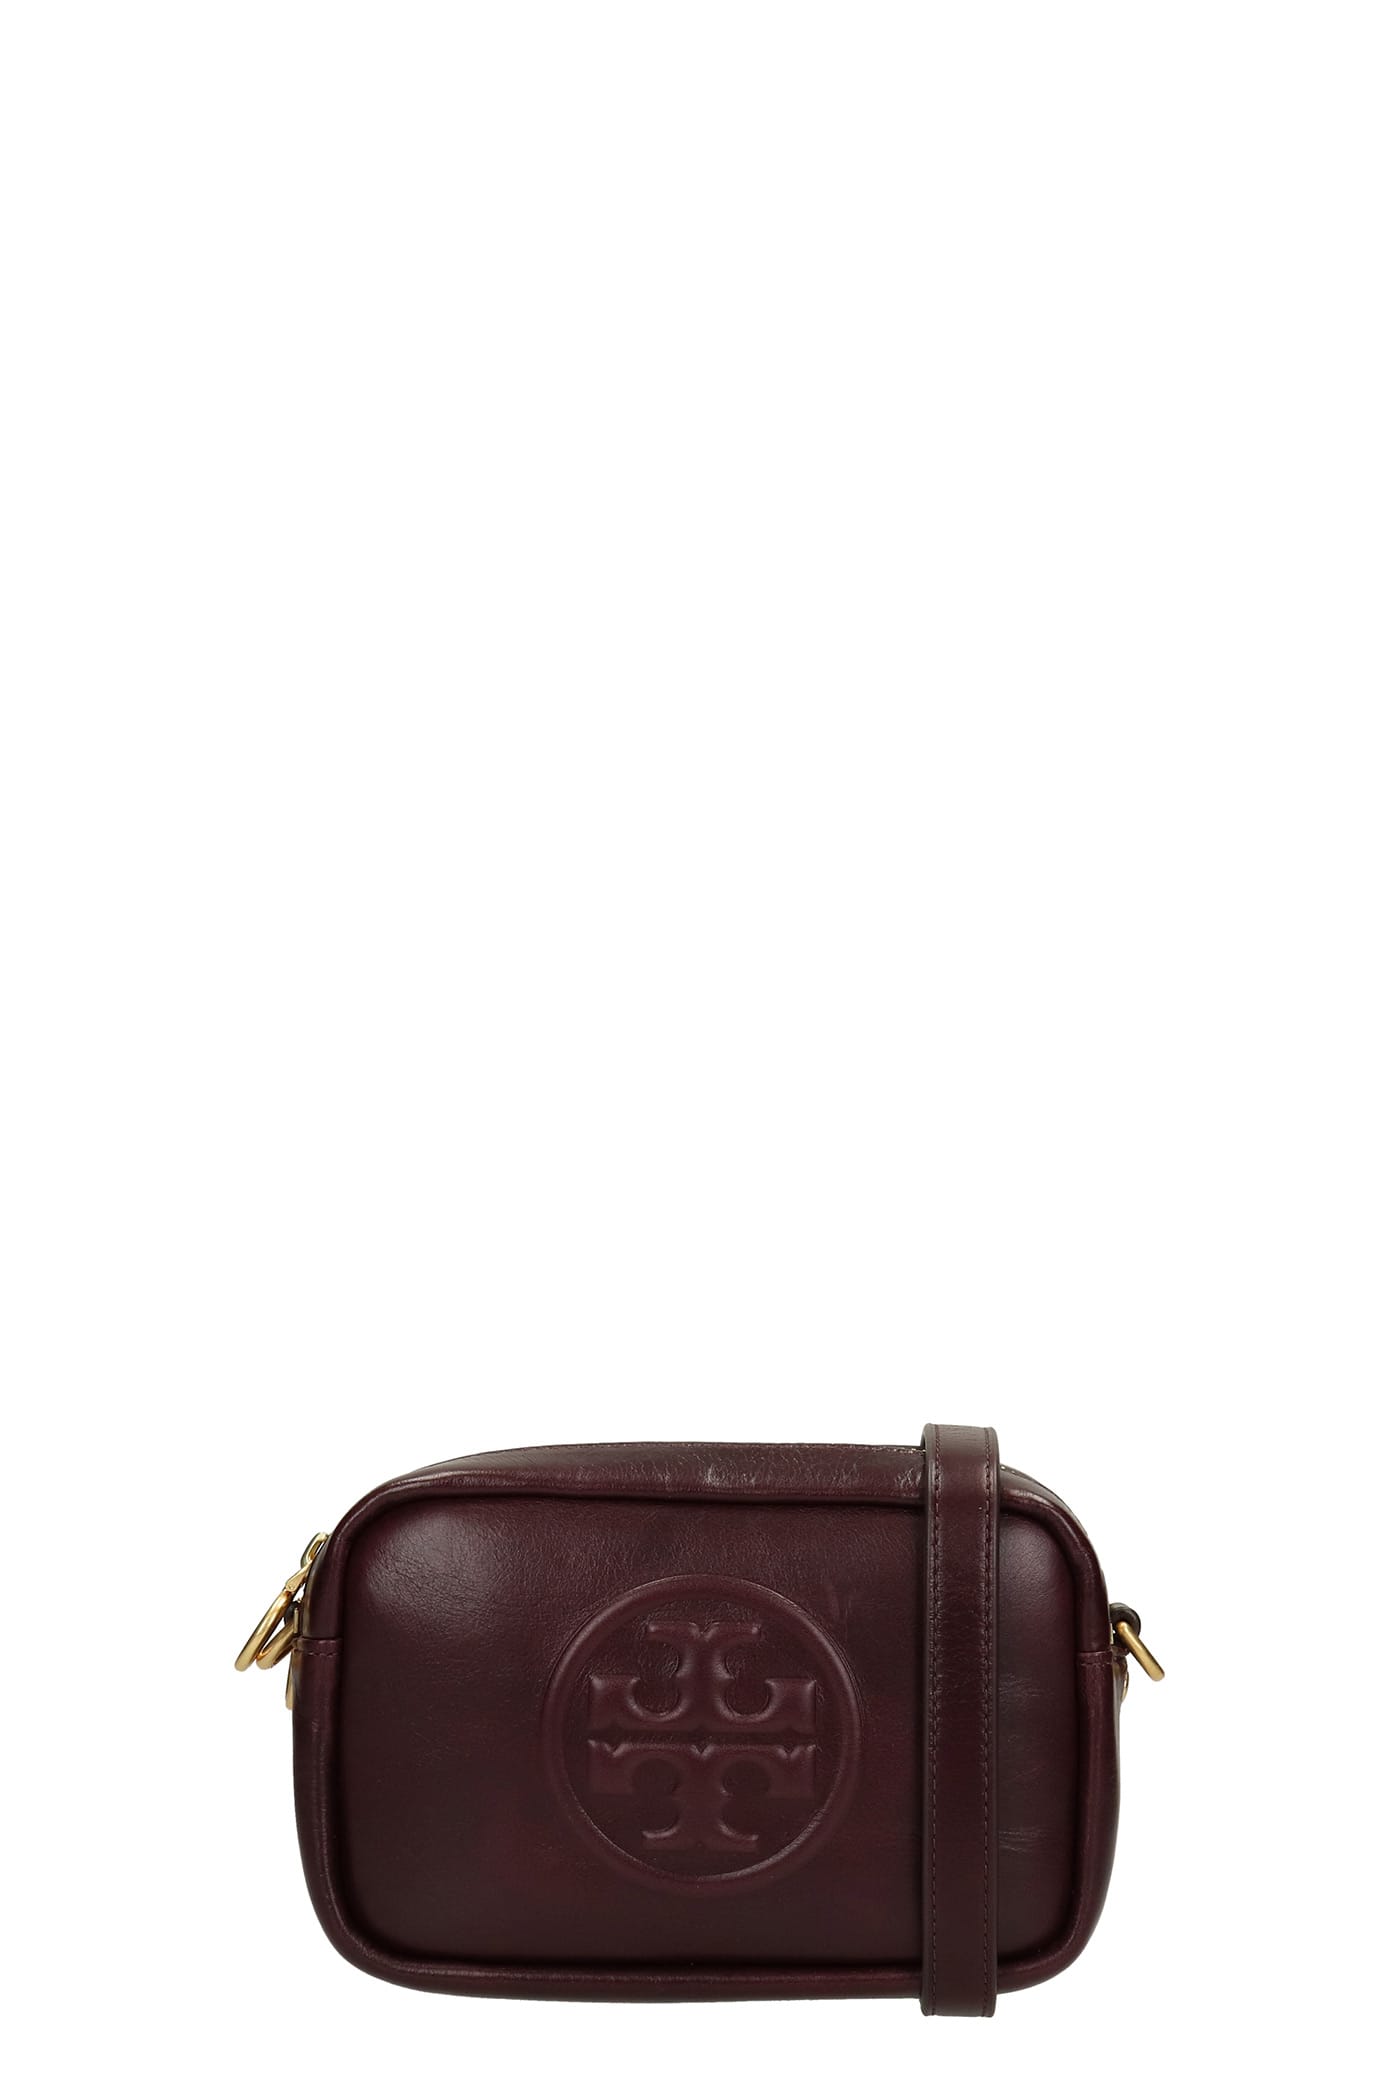 Tory Burch Perry Bomber Shoulder Bag In Bordeaux Leather